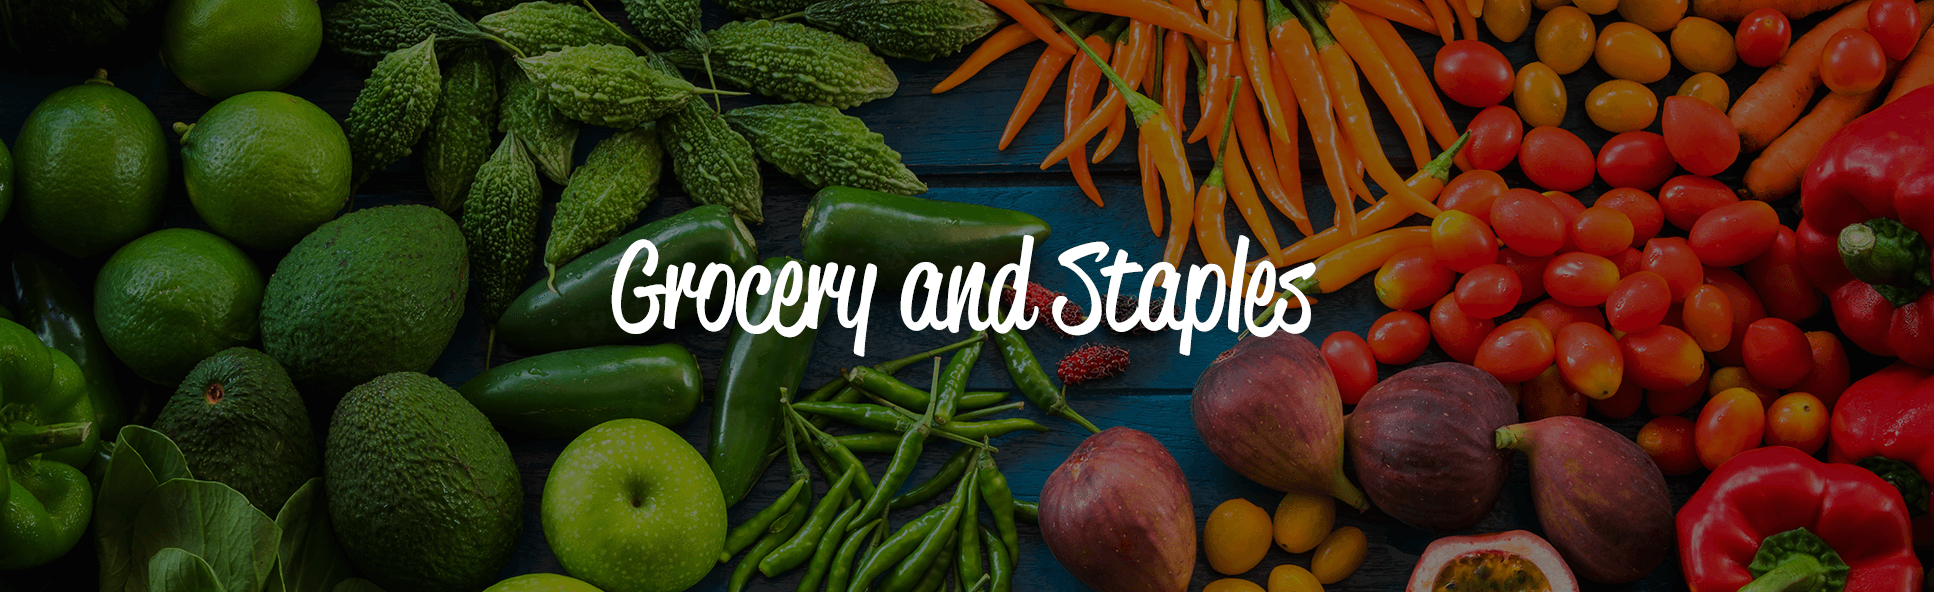 Grocery & Staples